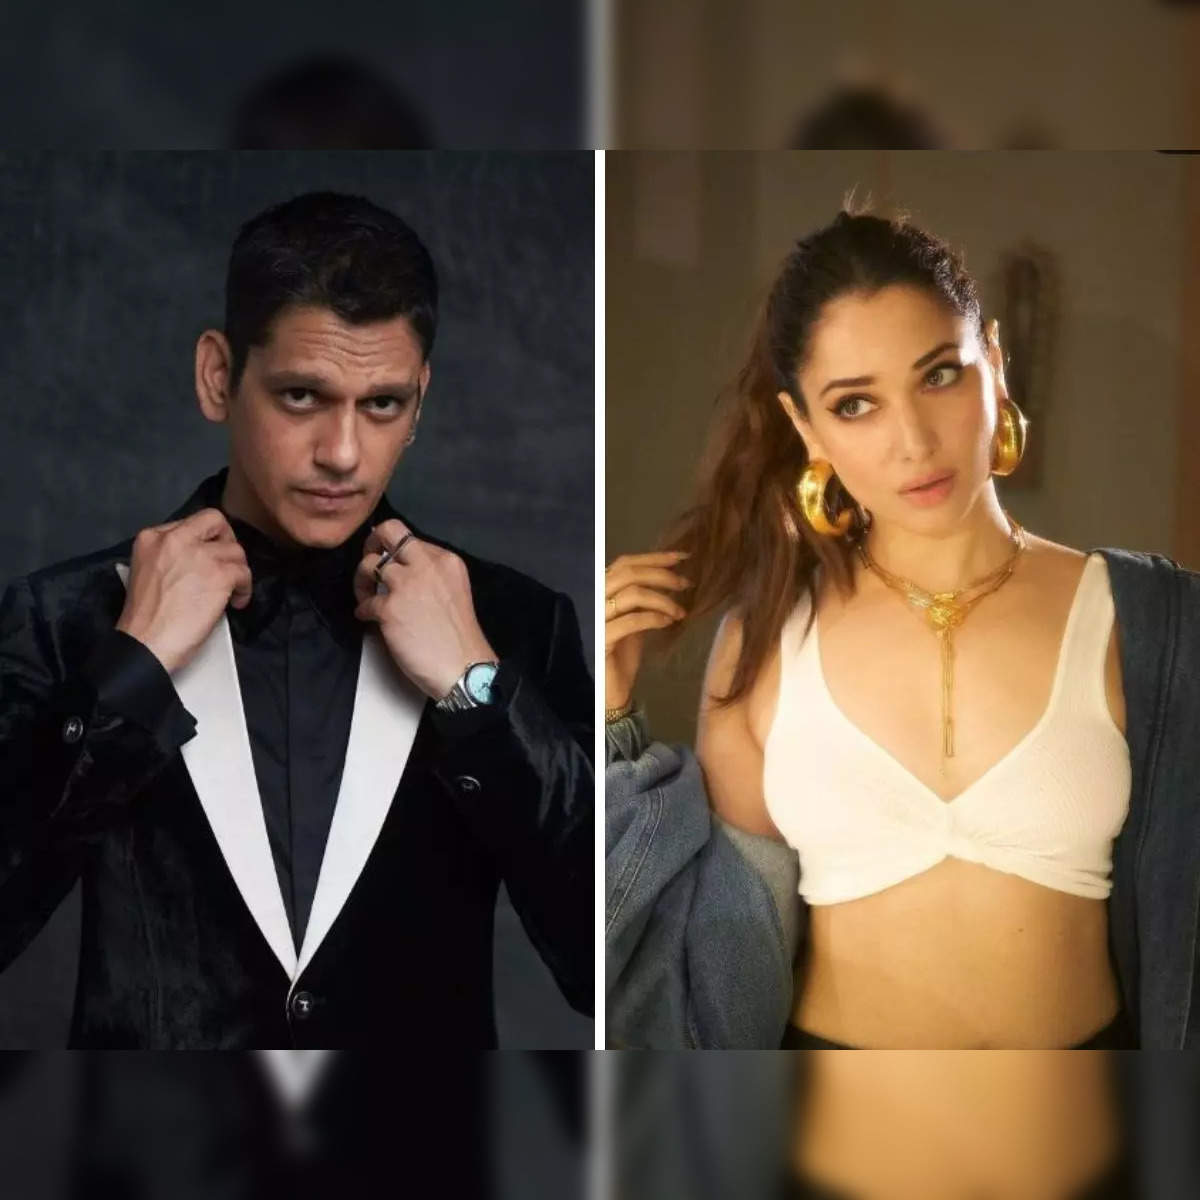 Tamanna Hd Pics Sex - Tamannaah Bhatia relationship: Tamannaah Bhatia confirms relationship with  Vijay Varma, says she is in a 'happy place' - The Economic Times